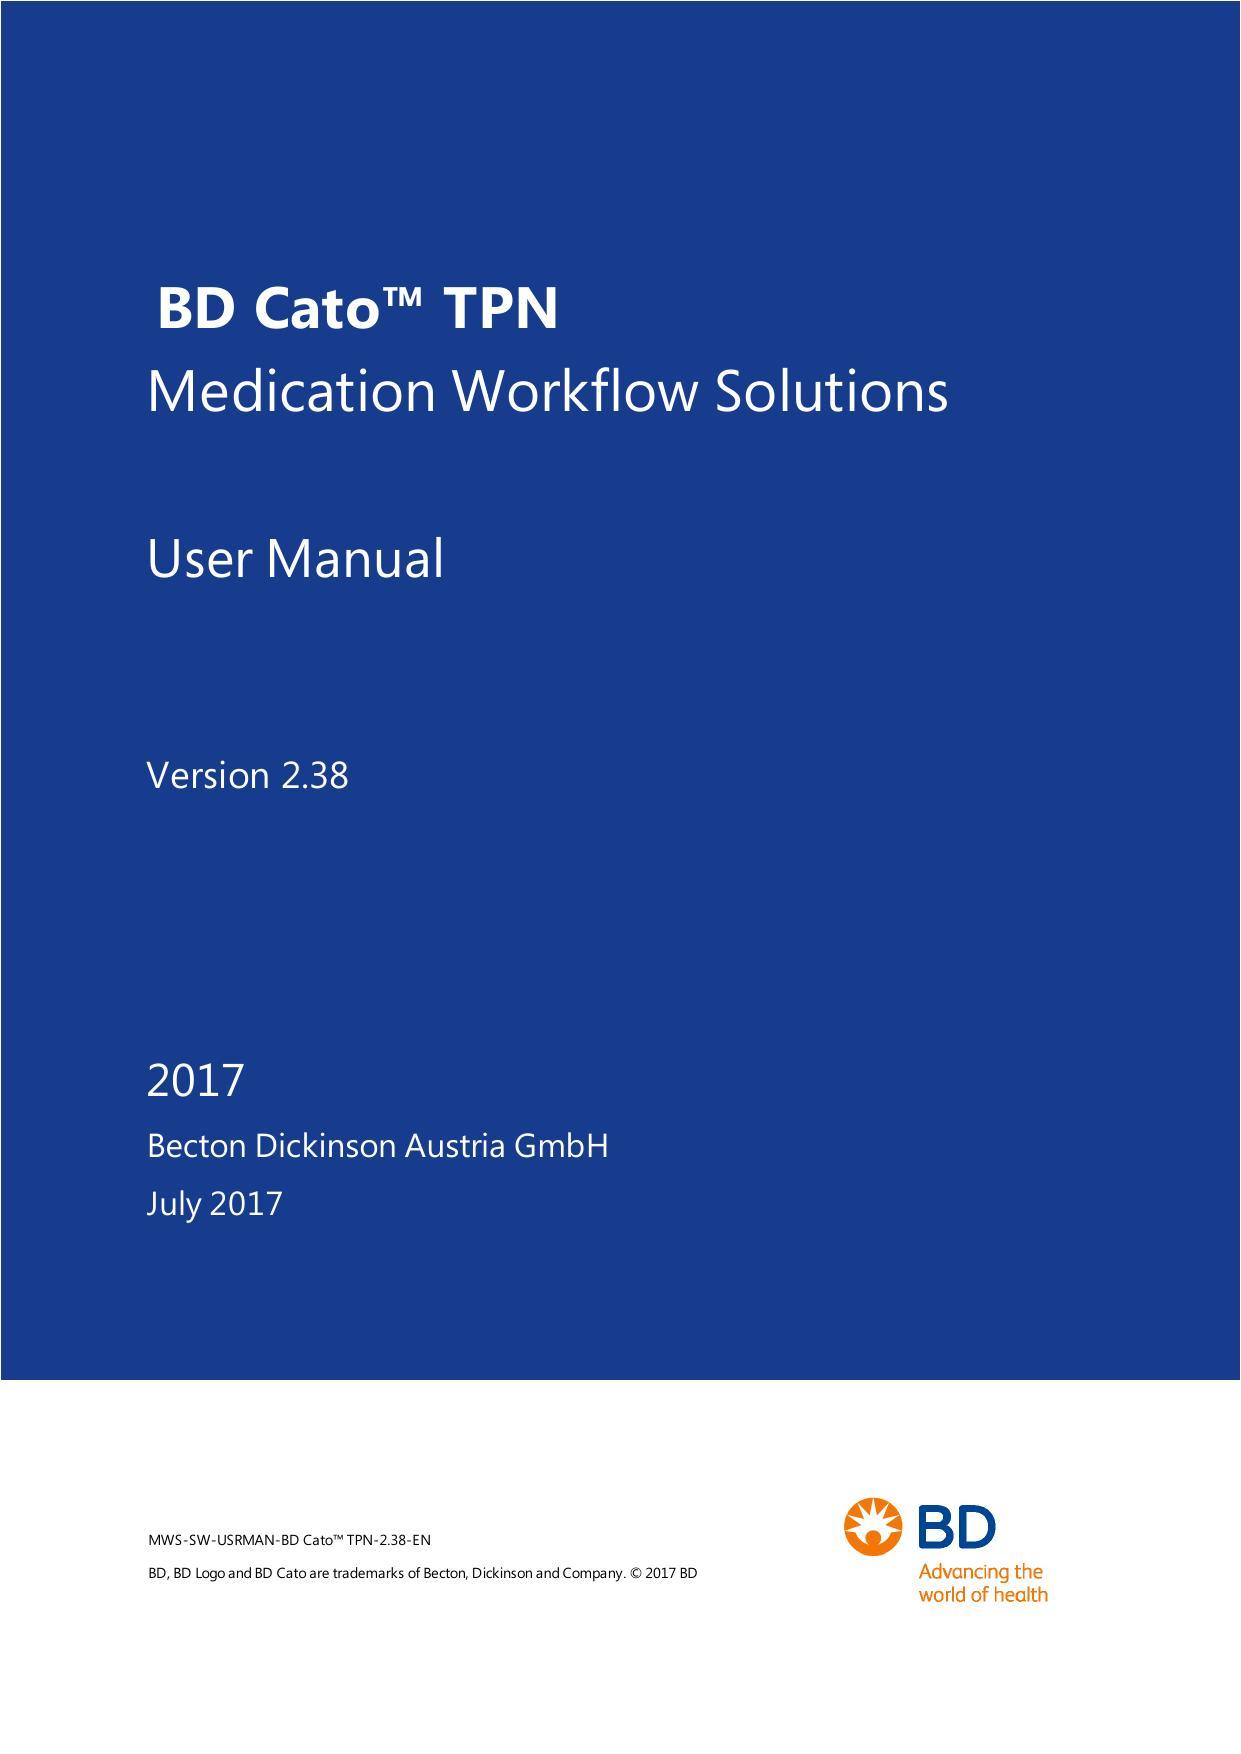 bd-cato-tpn-medication-workflow-solutions-user-manual.pdf